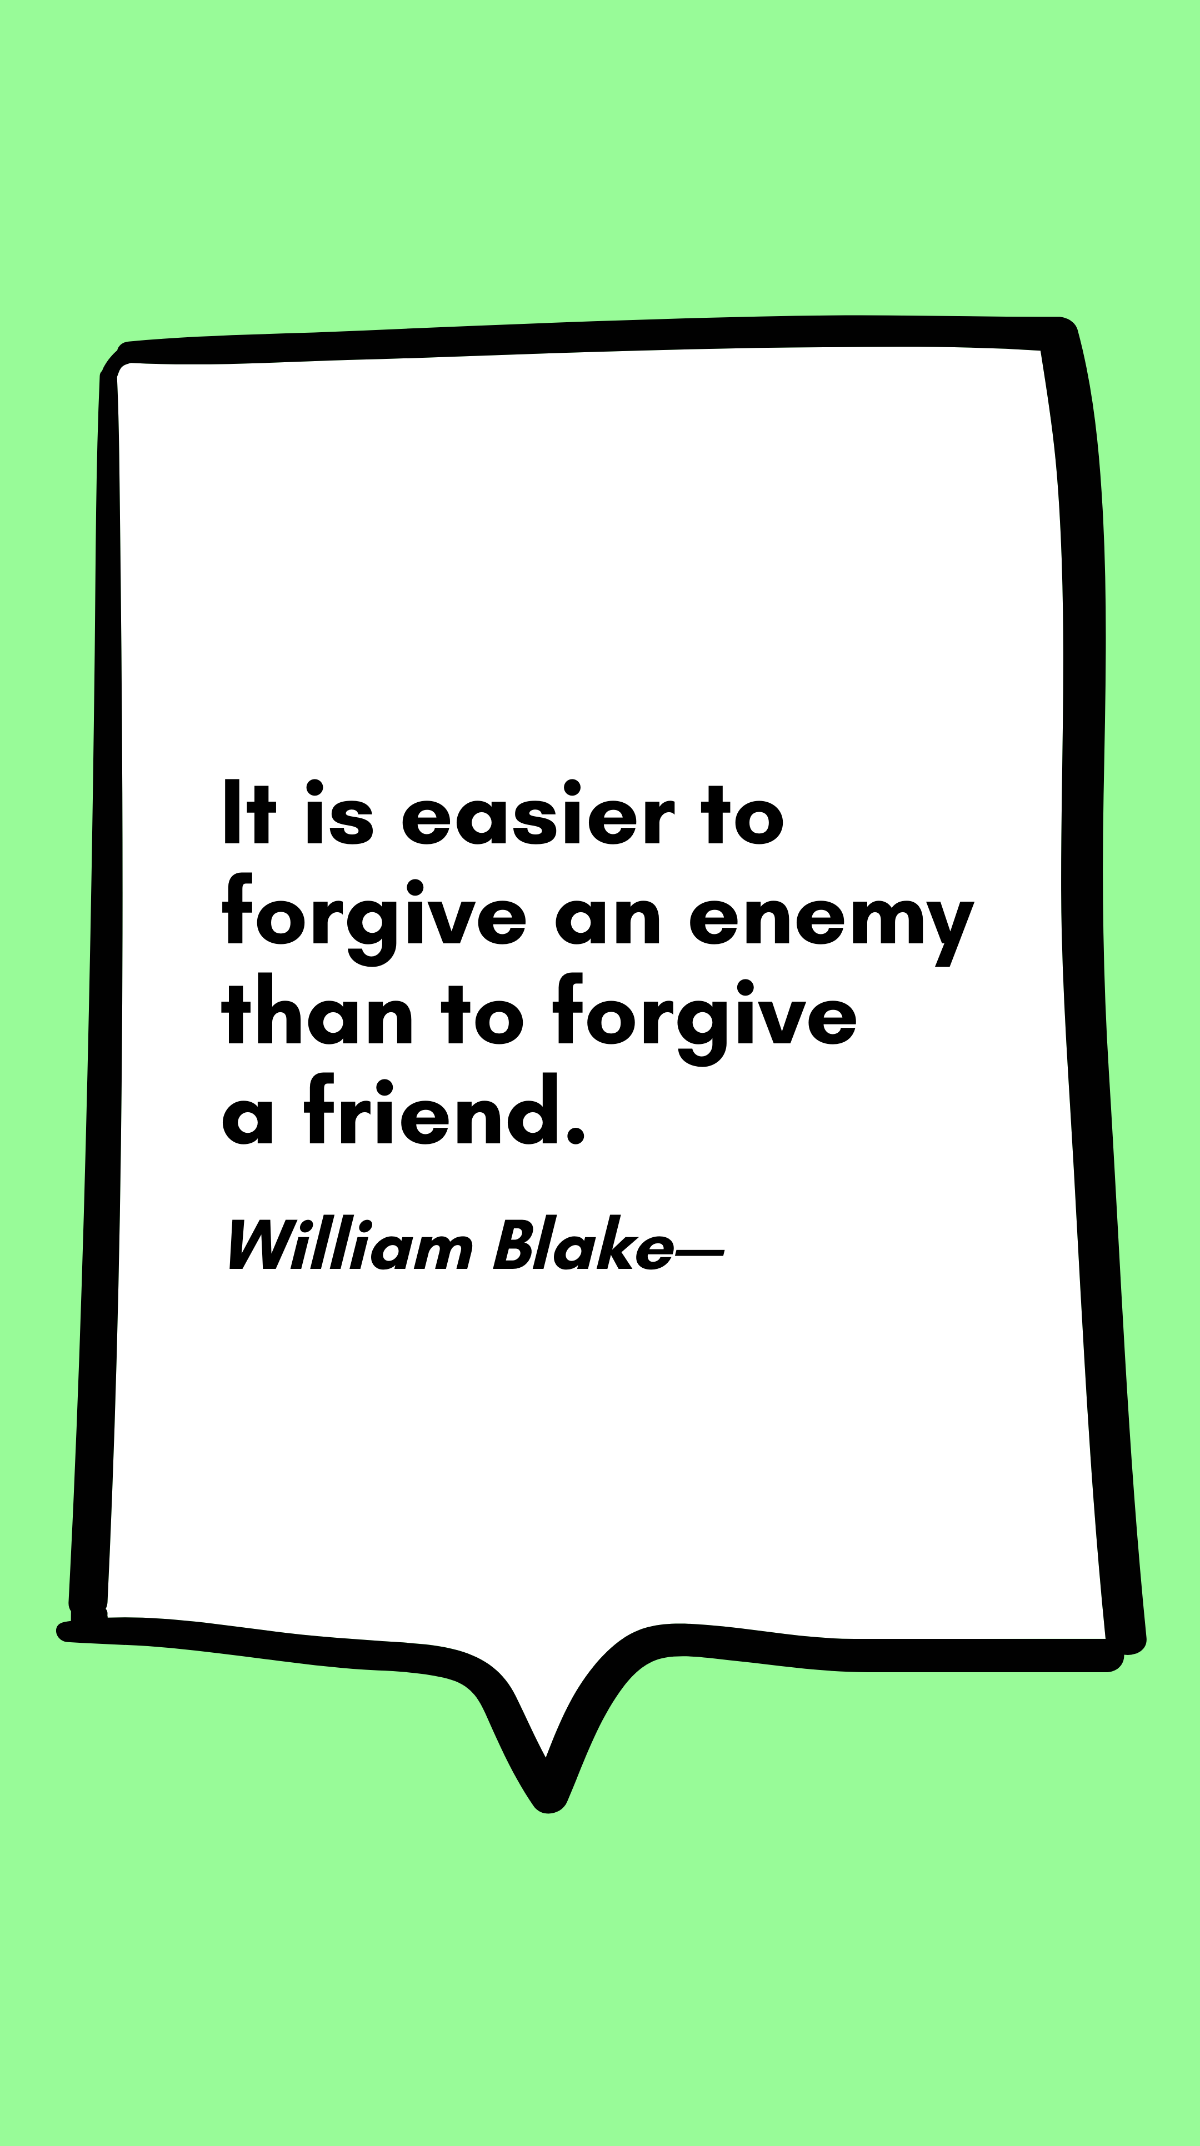 William Blake - It is easier to forgive an enemy than to forgive a friend. Template